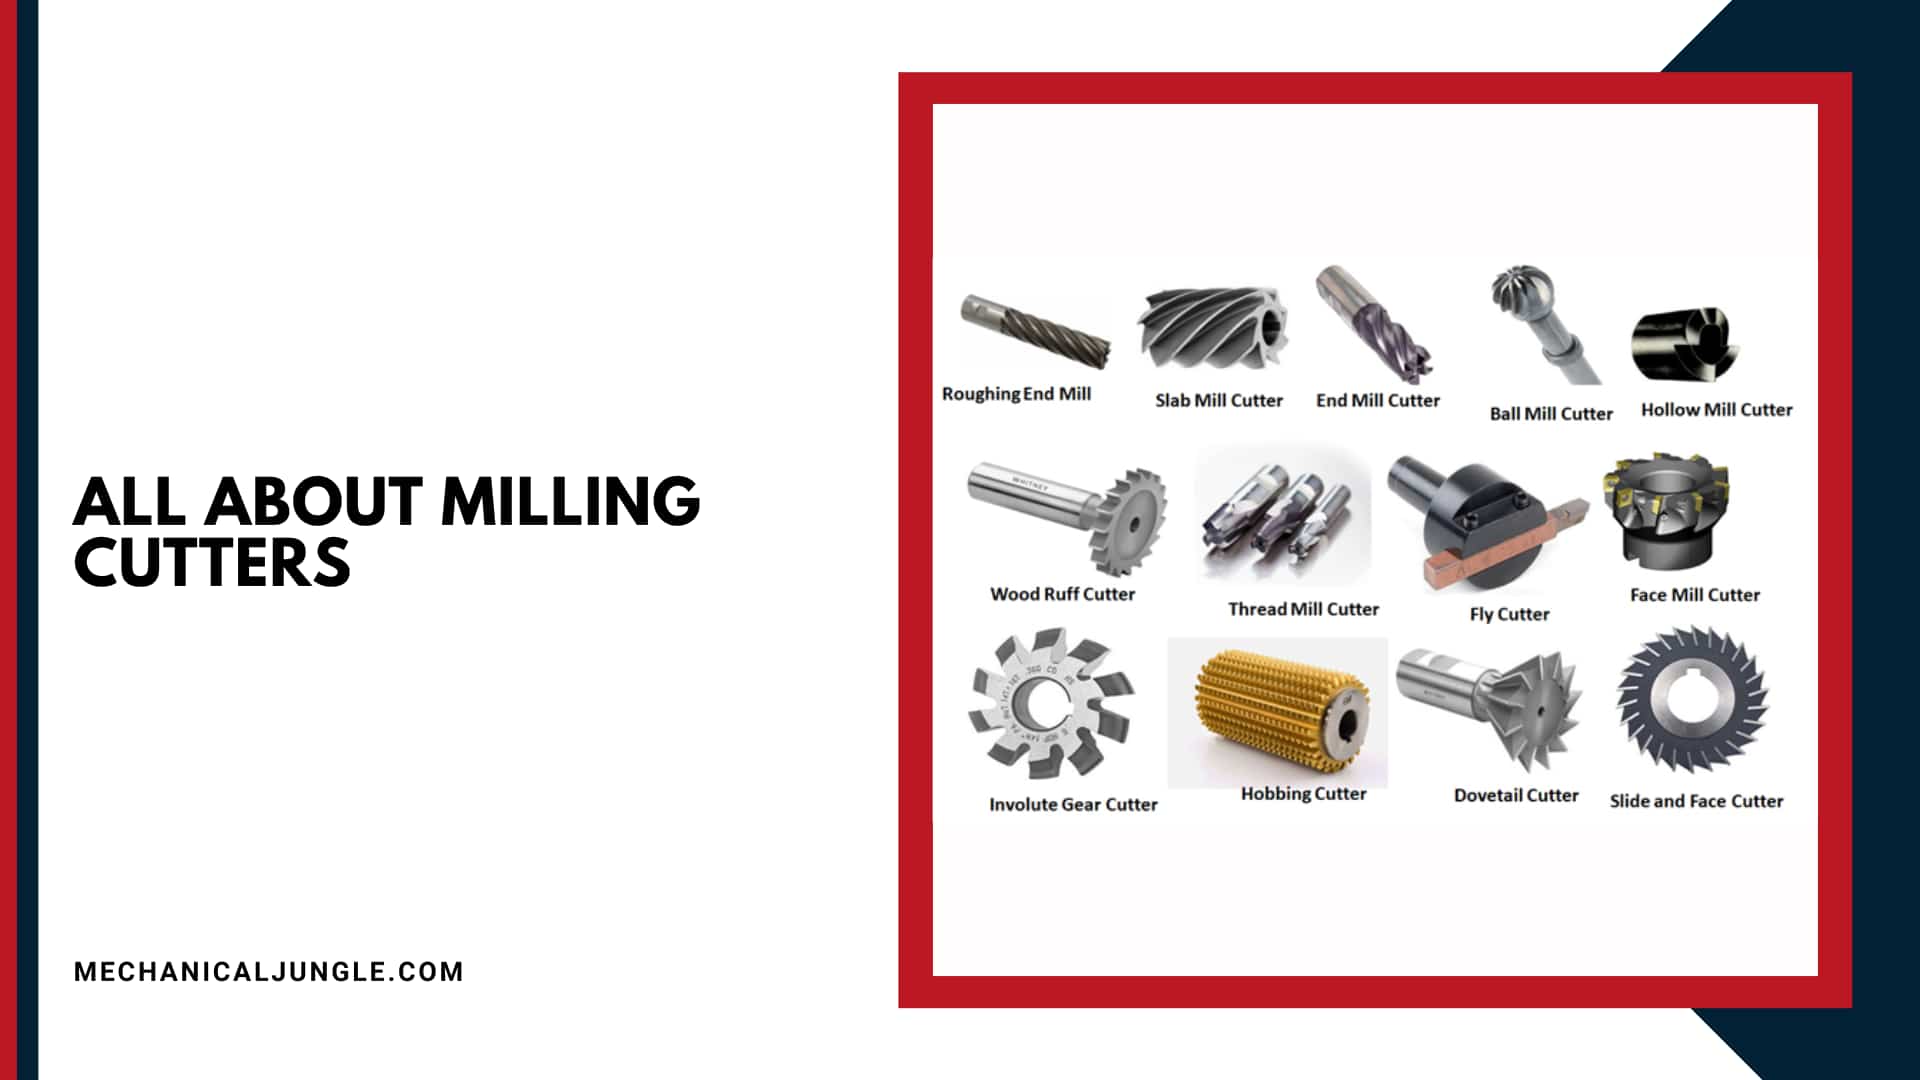 All About Milling Cutters